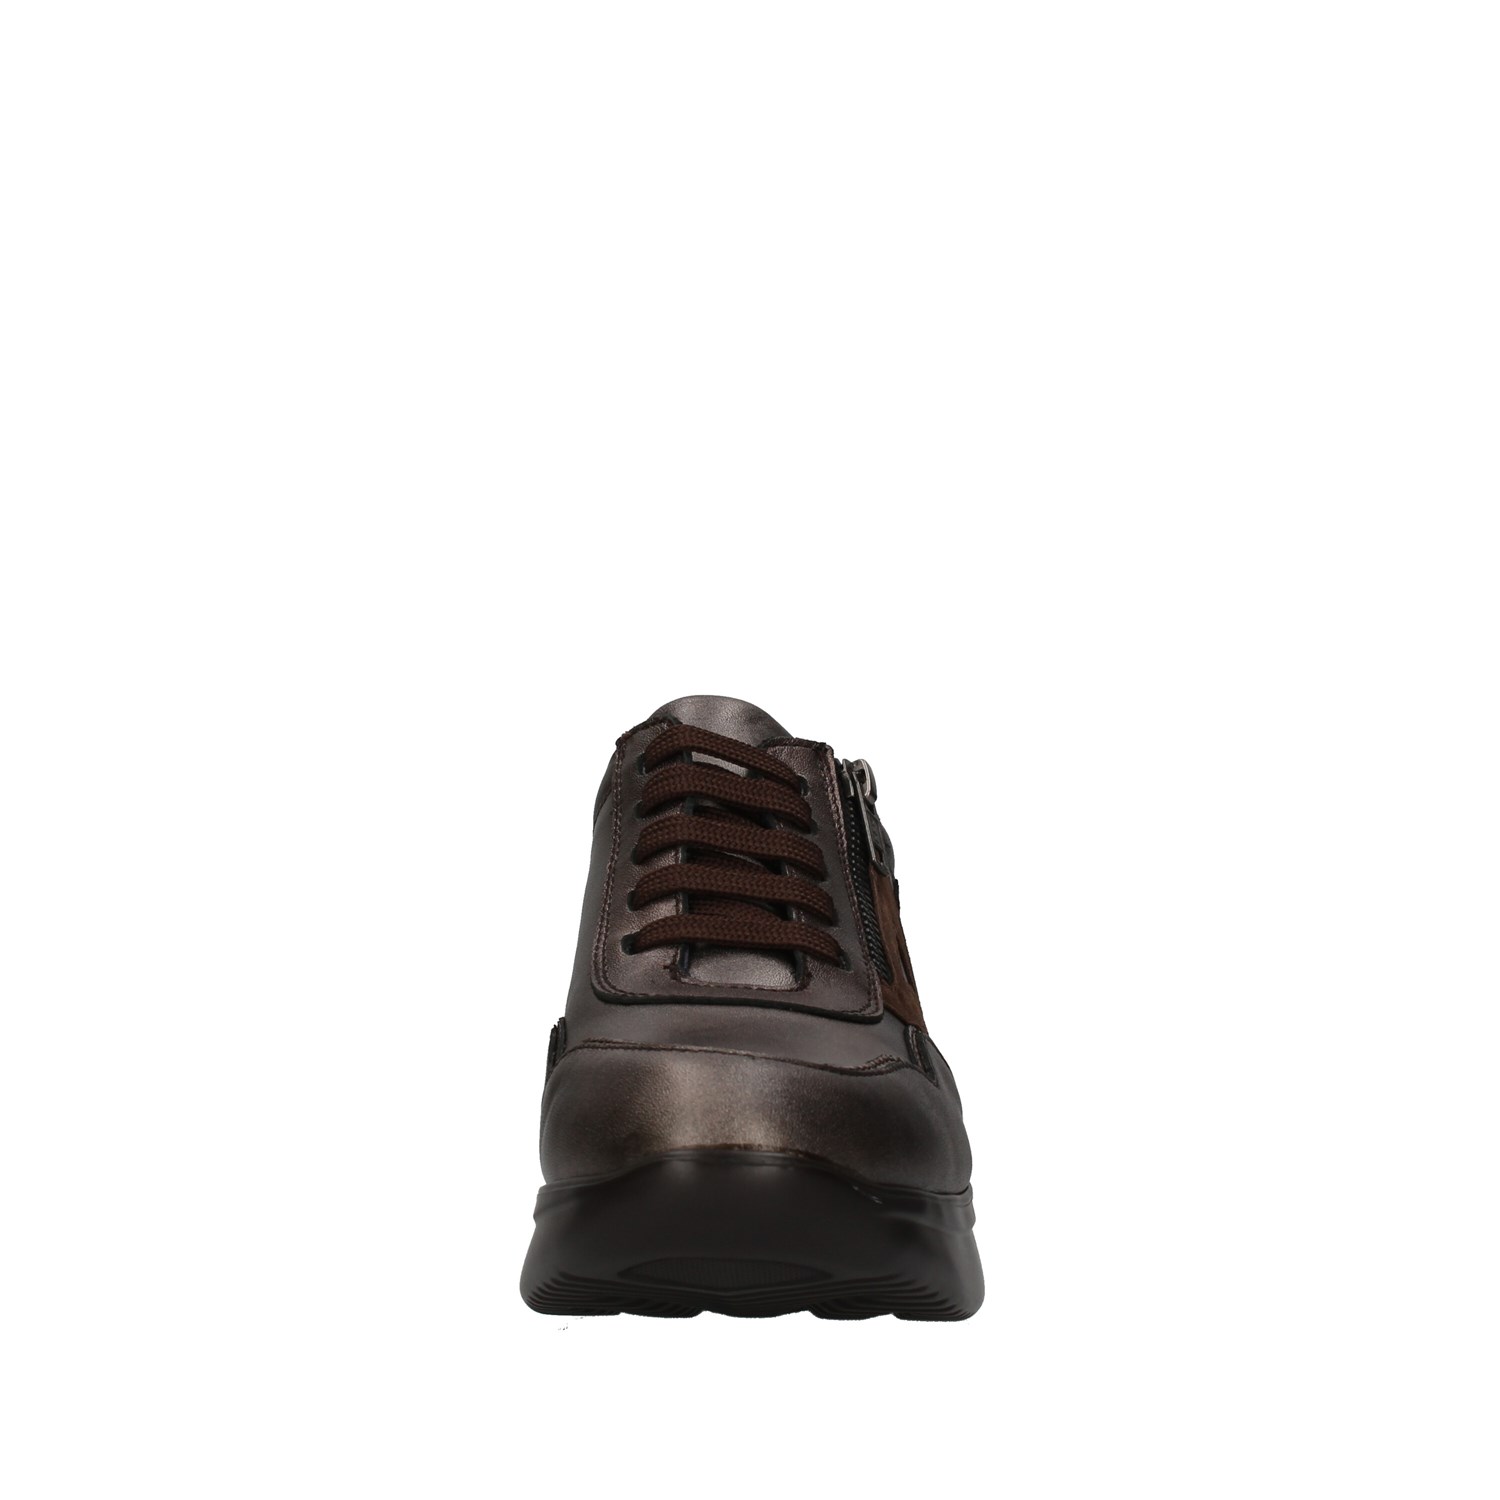 Callaghan 30008 BROWN Shoes Woman